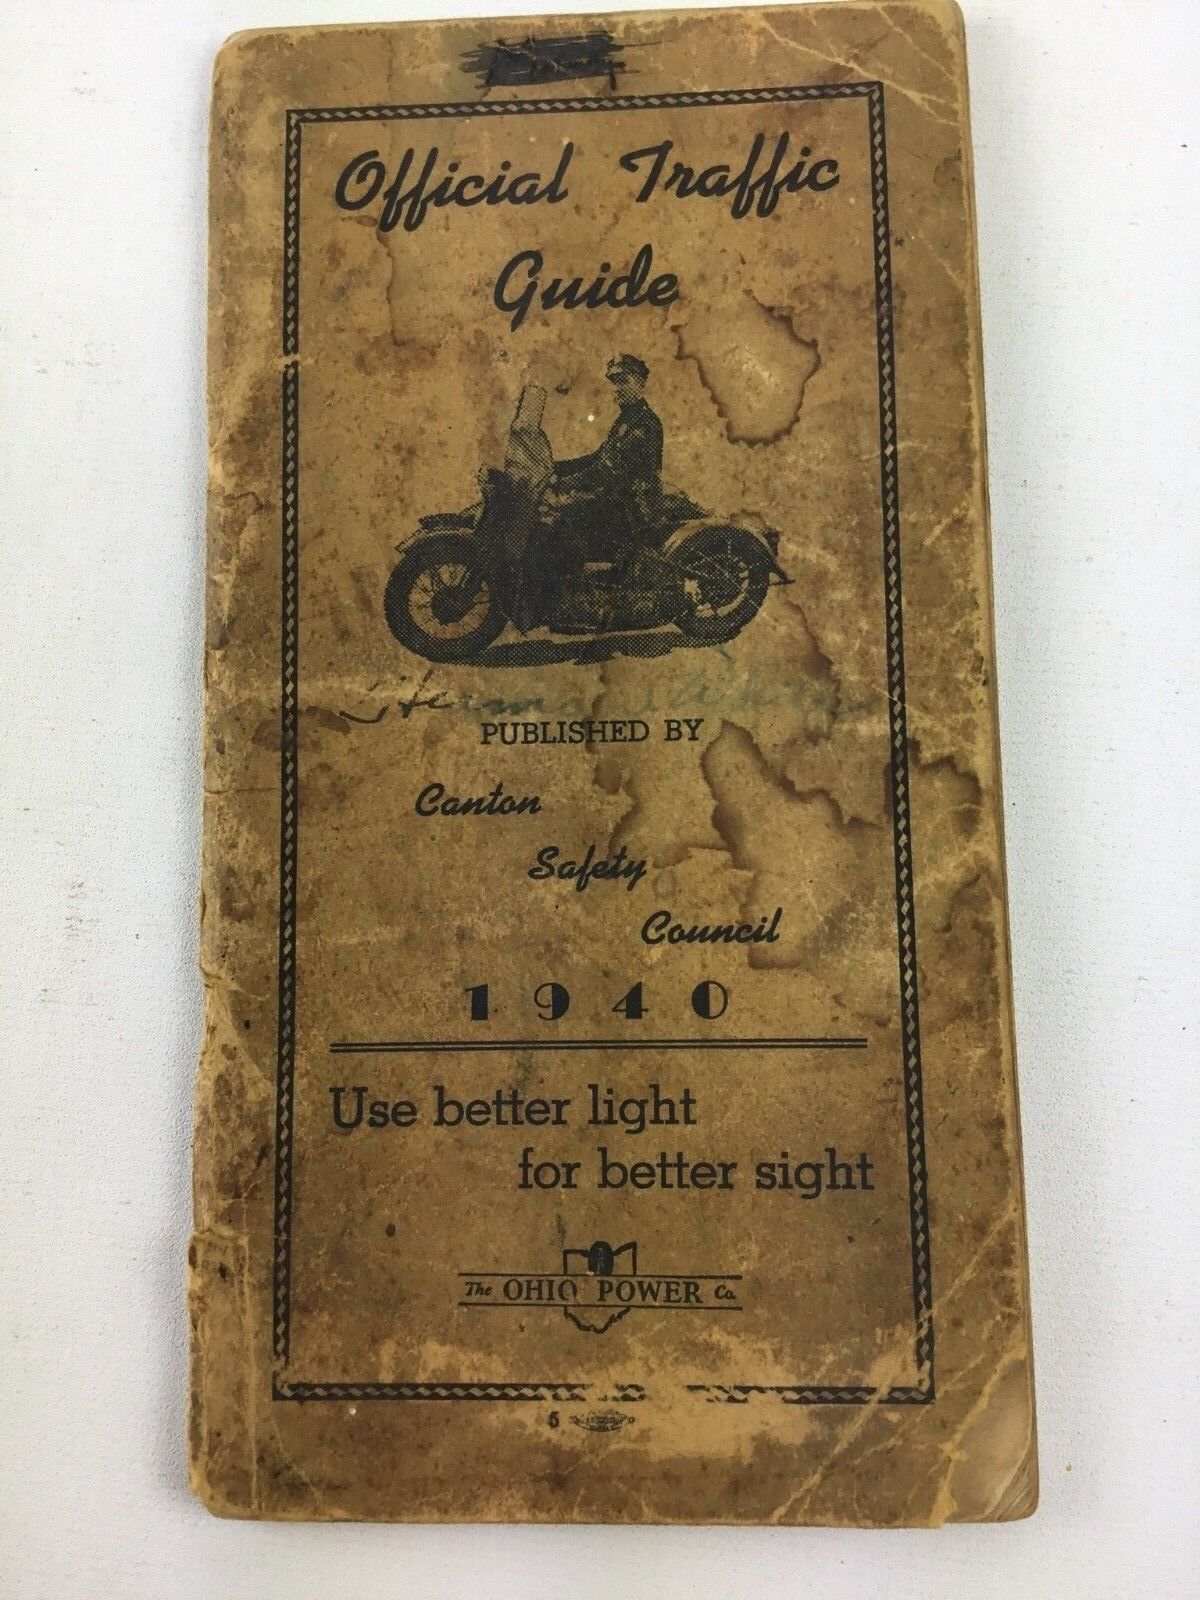 Canton OHIO Vintage Indian Harley Davidson traffic guide 1940 rare collectable